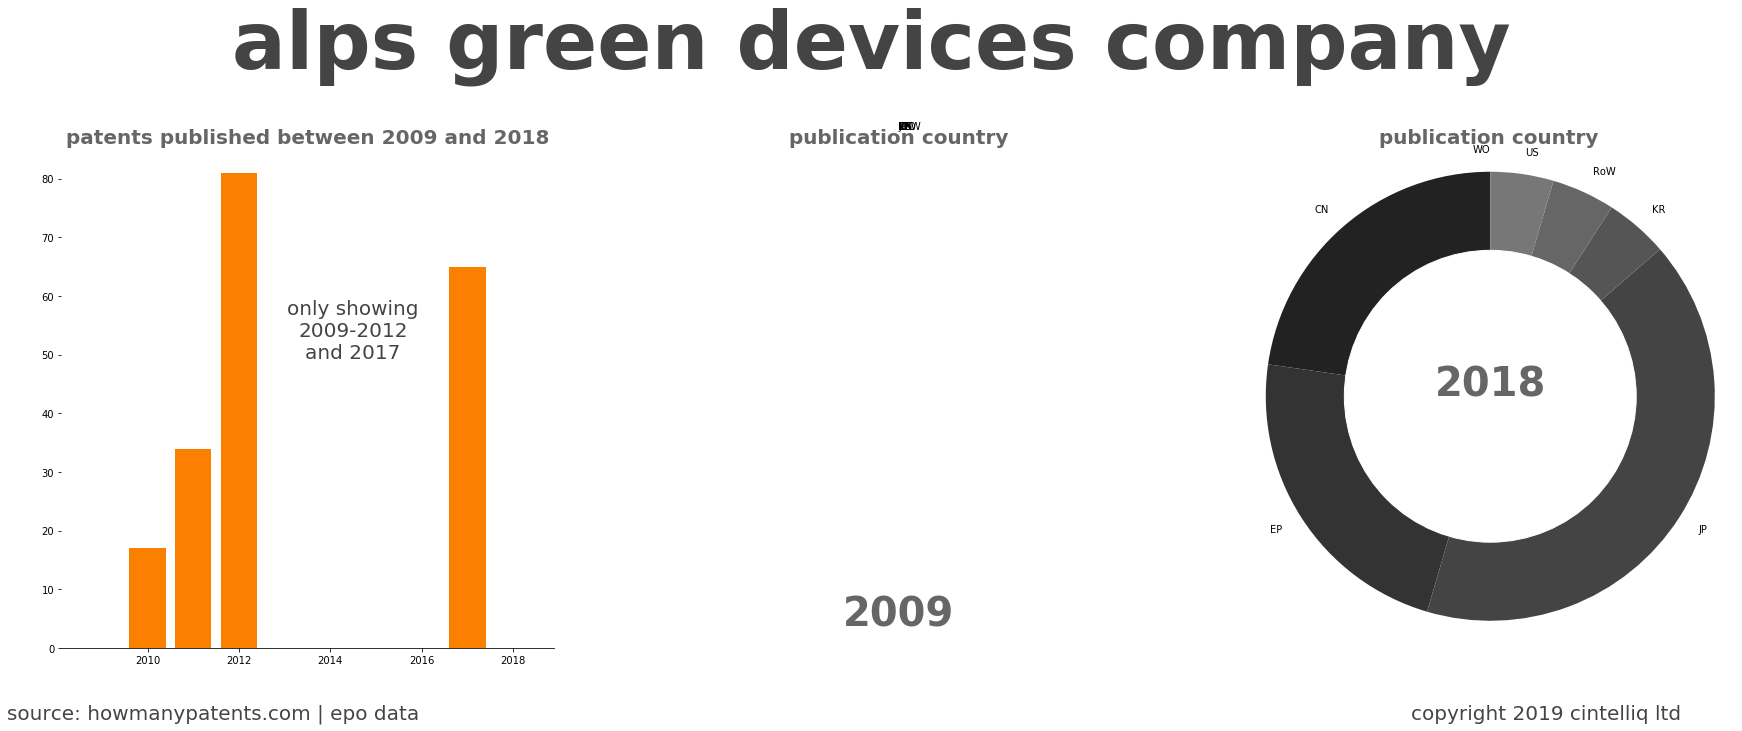 summary of patents for Alps Green Devices Company